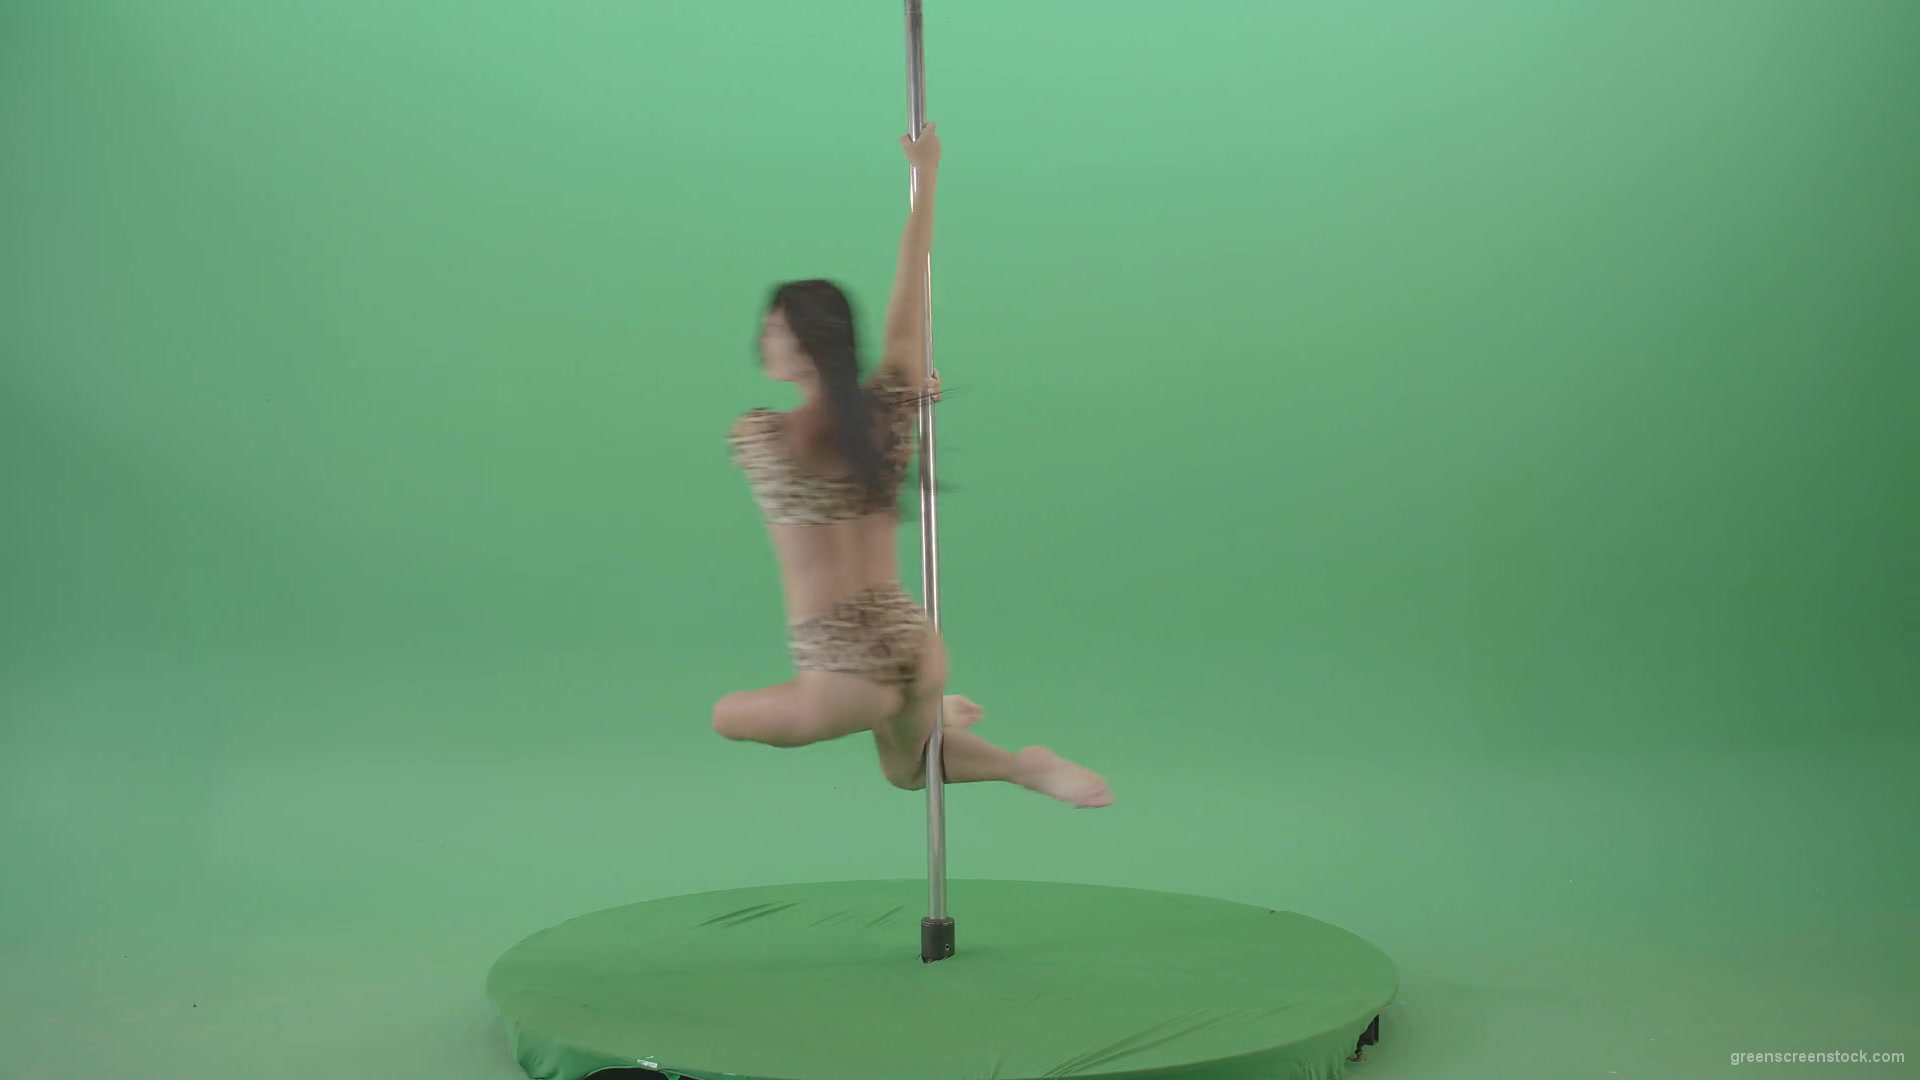 Glamor-girl-in-leopard-underwear-dancing-on-pilon-Pole-dance-and-spinning-isolated-on-Green-Screen-Video-Footage-1920_007 Green Screen Stock